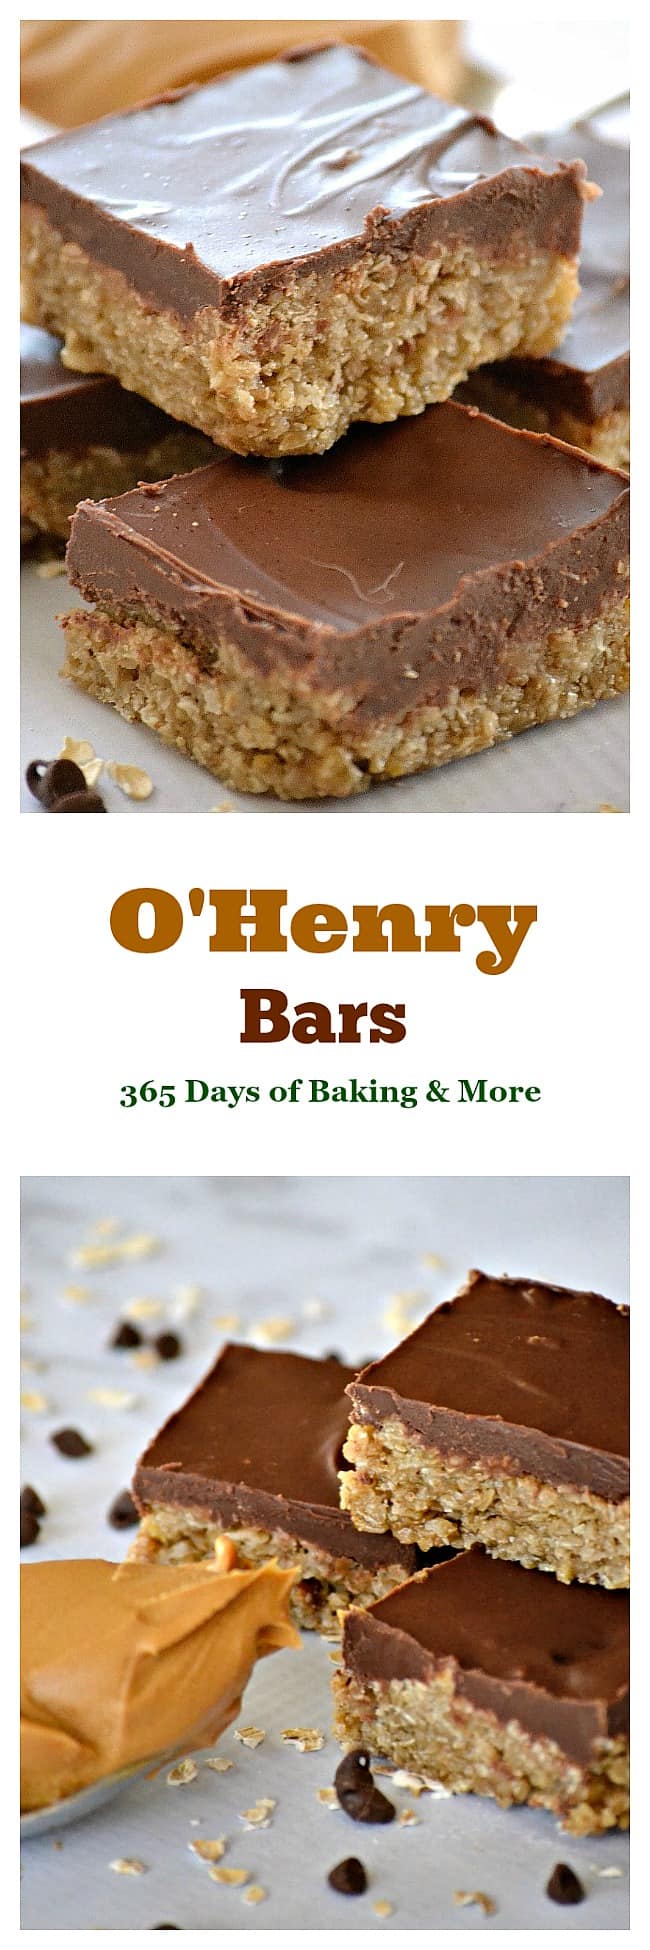 O'Henry Bars are a sweet oatmeal base topped with chocolate and peanut butter - a great after-school snack or a delicious addition to holiday cookie trays!